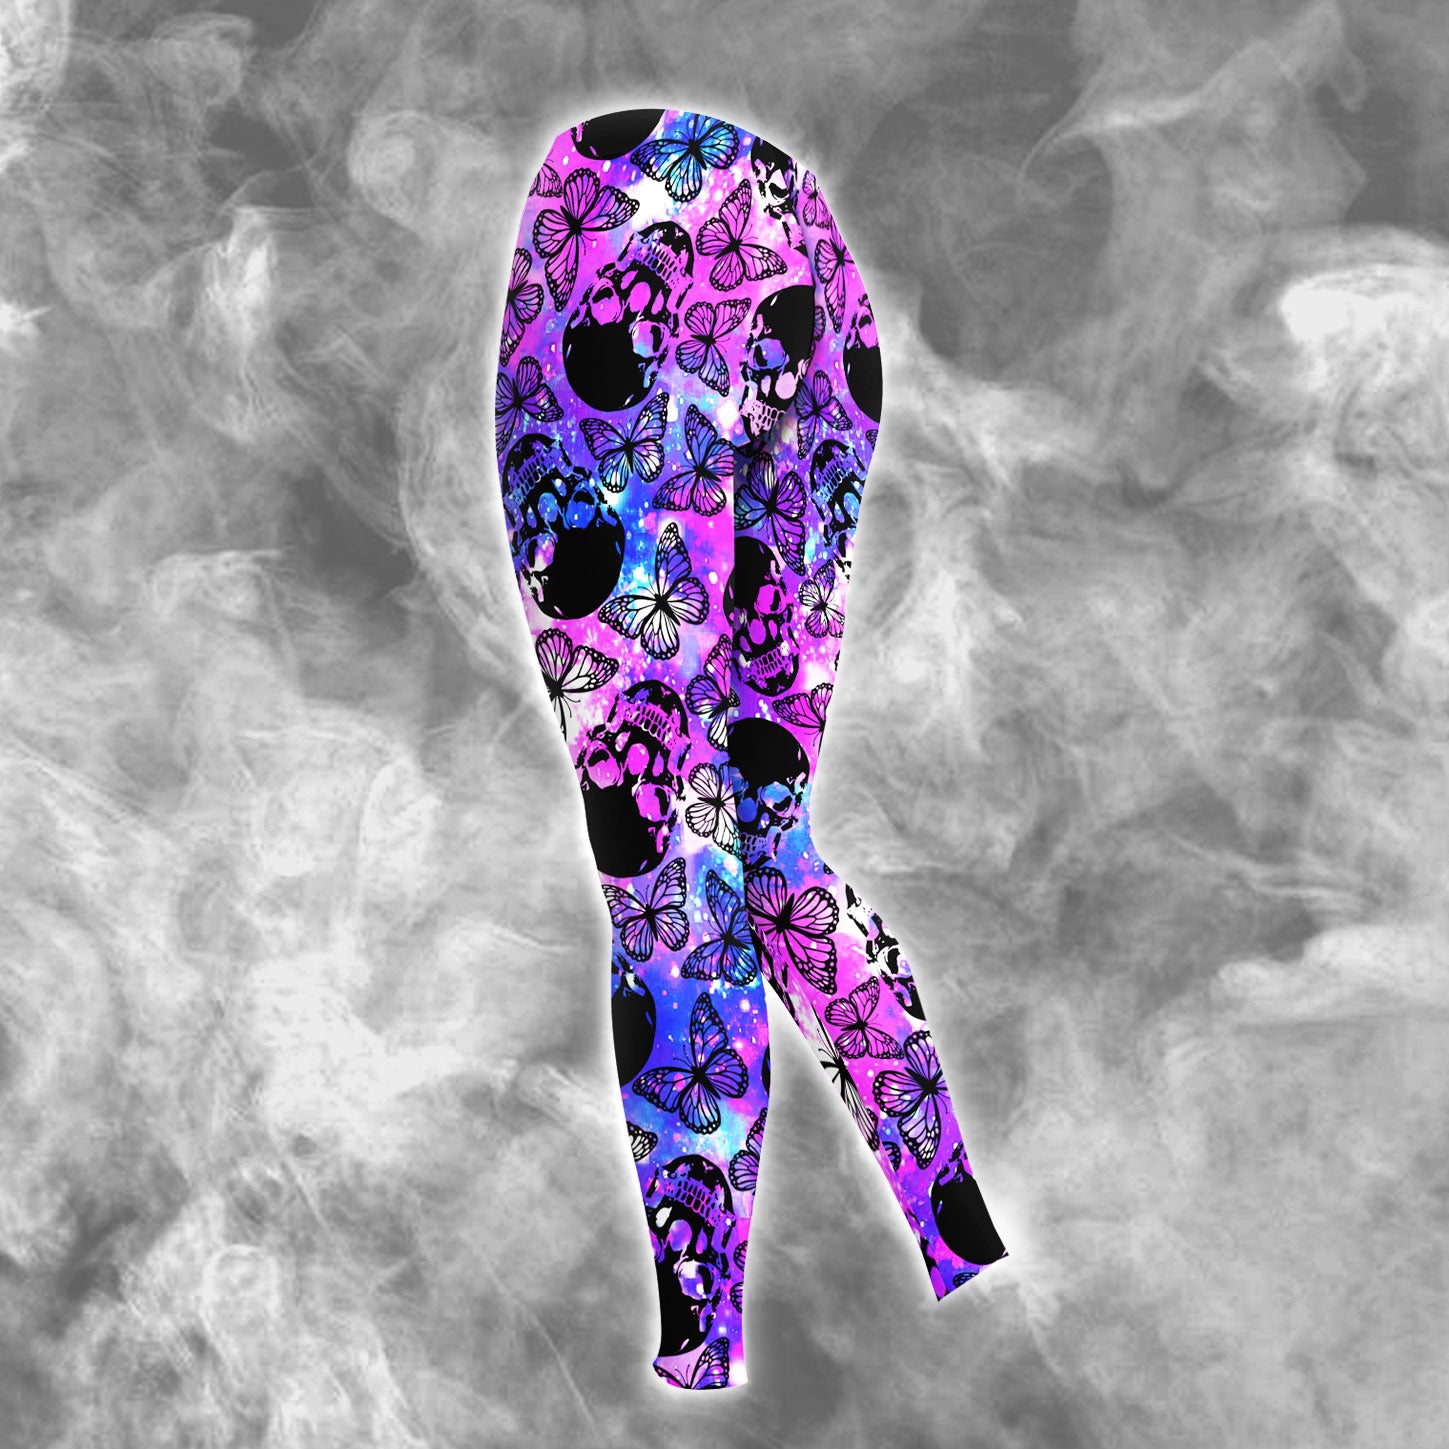 Purple Smoke Skull Butterfly Combo Hoodie and Leggings - Dark and edgy matching set with skull designs for a unique and stylish look.